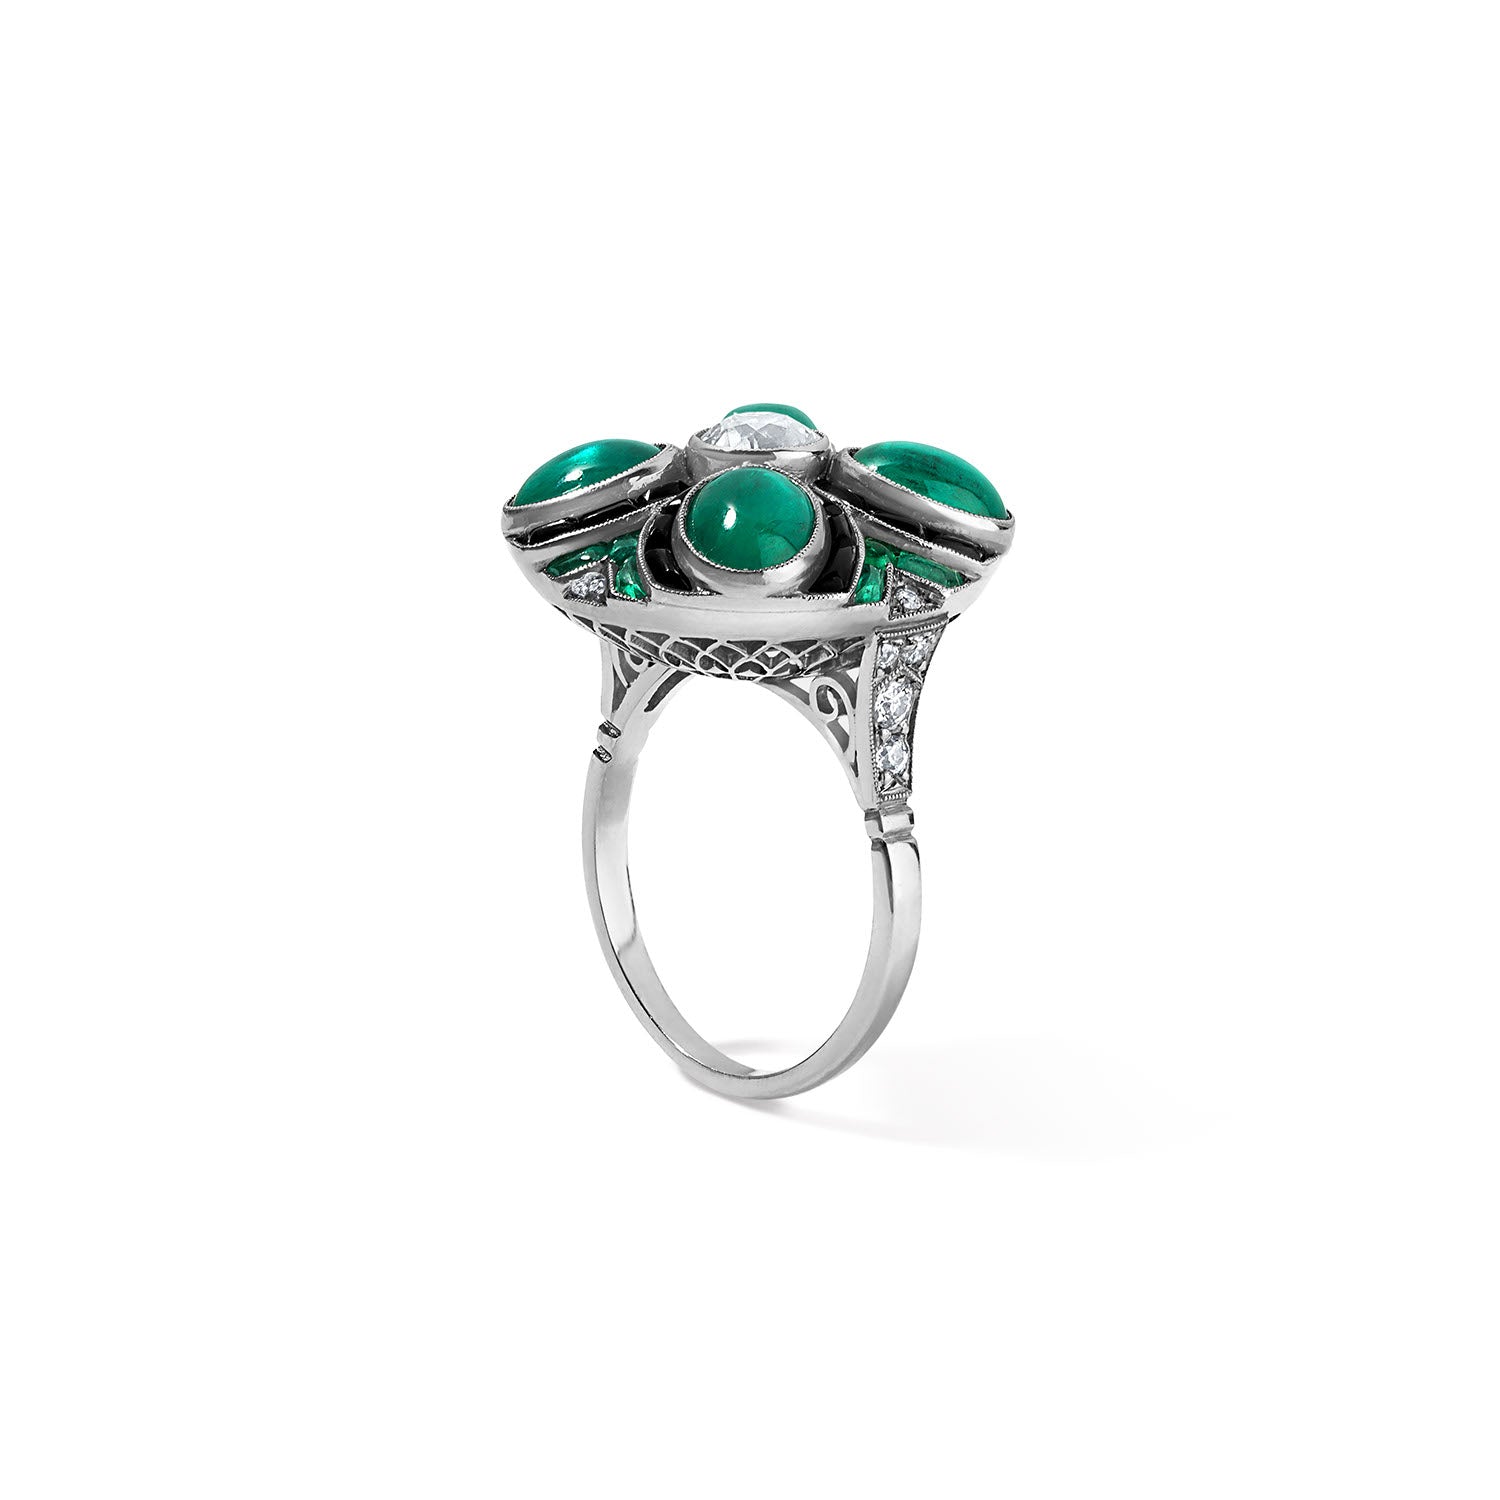 Deco Diamond, Emerald, and Onyx Cocktail Ring